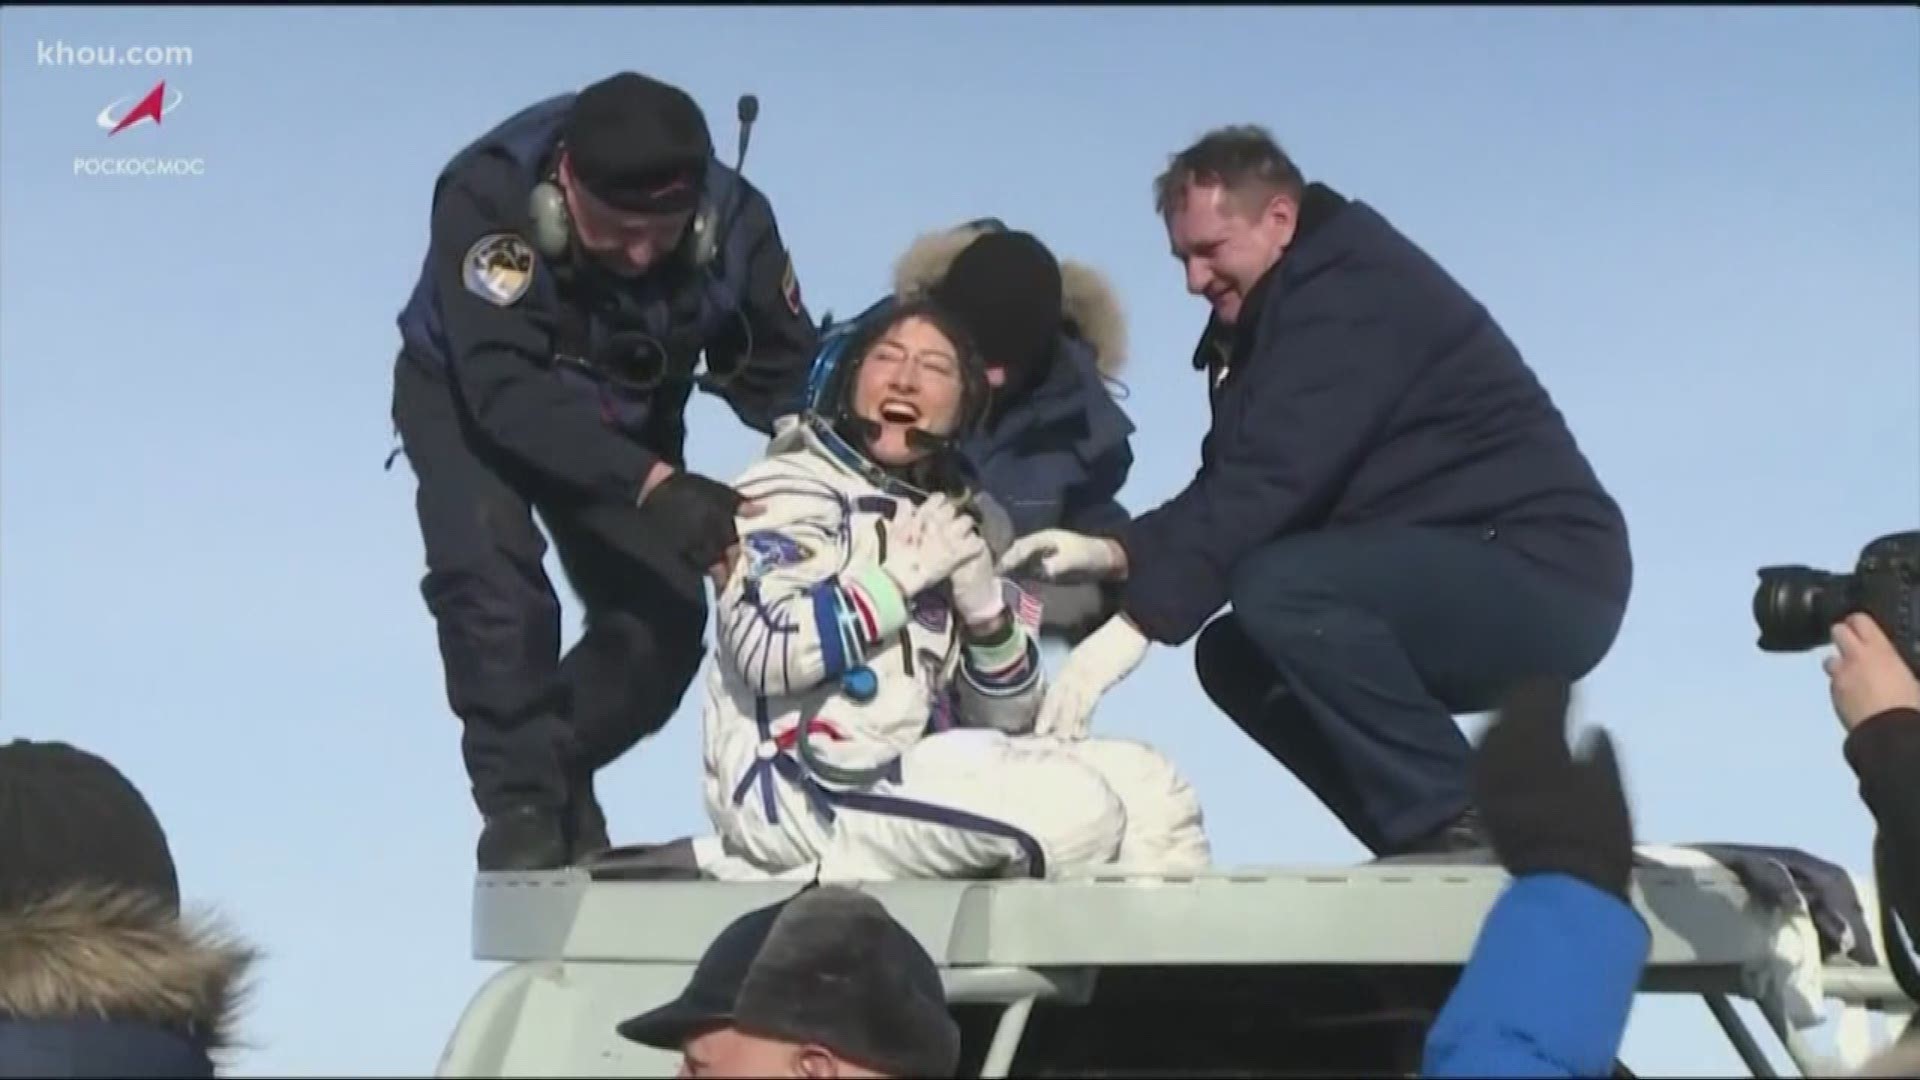 Koch radiated joy as she took her first breaths of fresh air. The American astronaut is home after spending nearly a year in space.